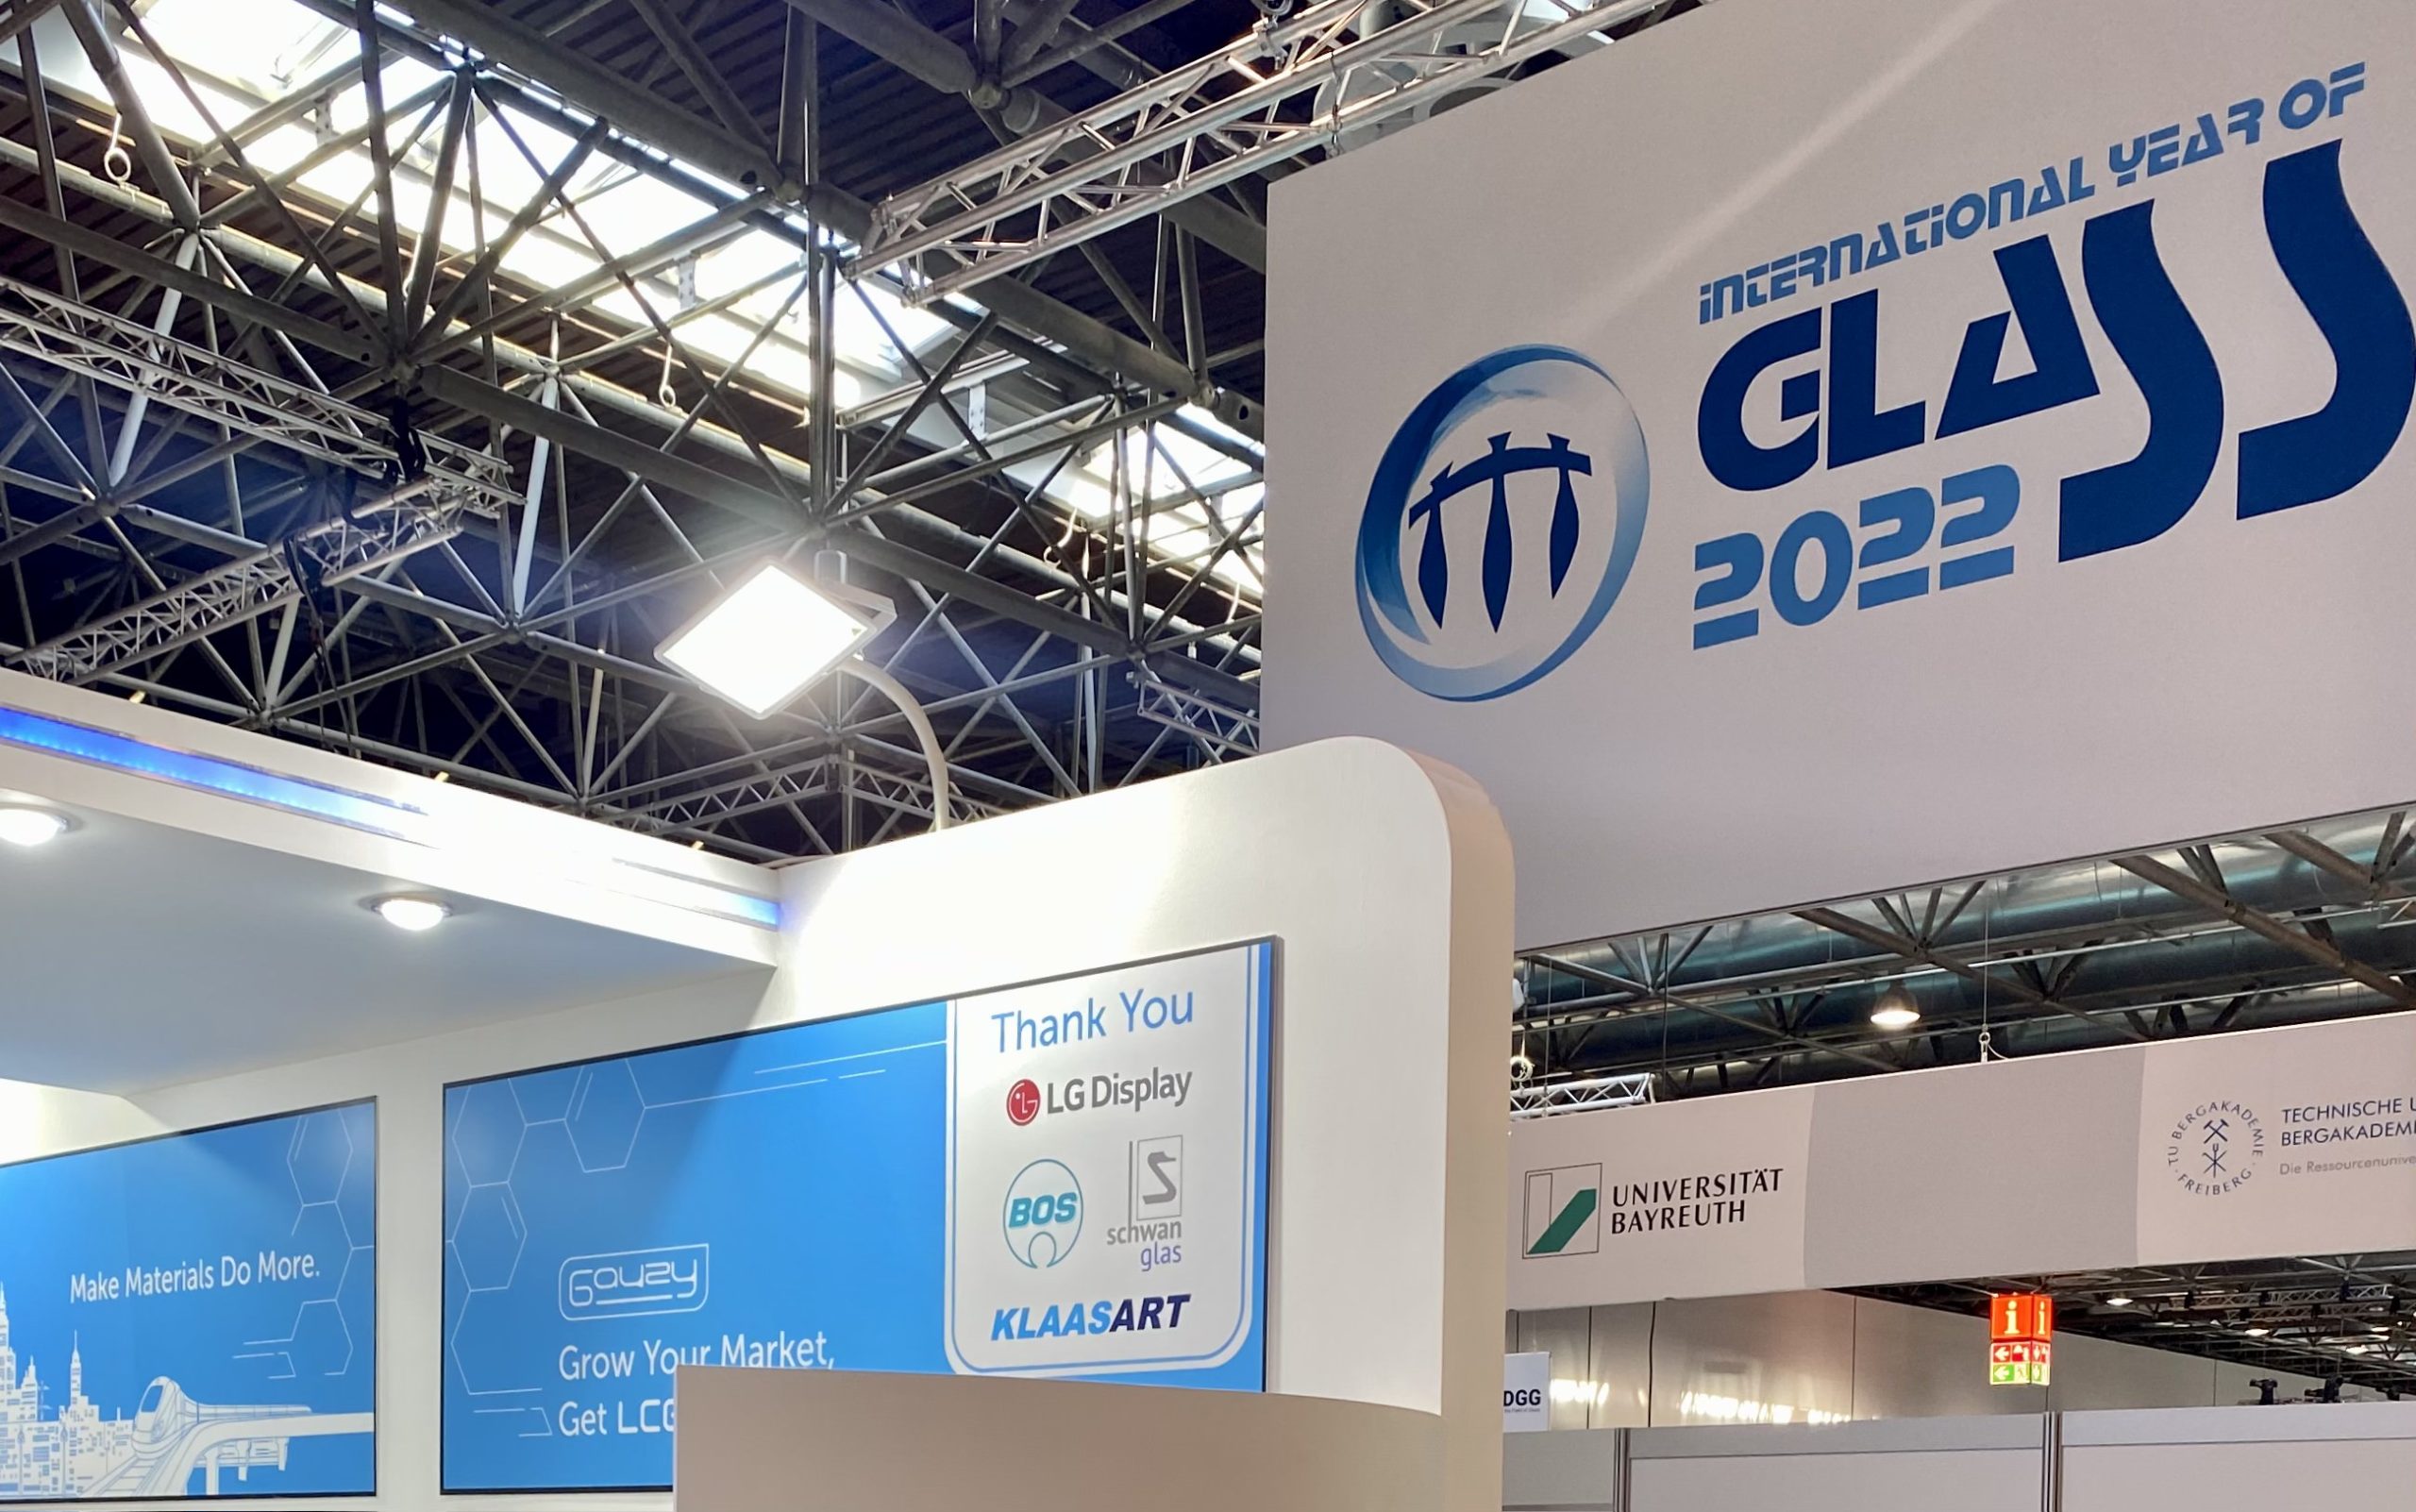 Klaasart's products at Glasstech 2022